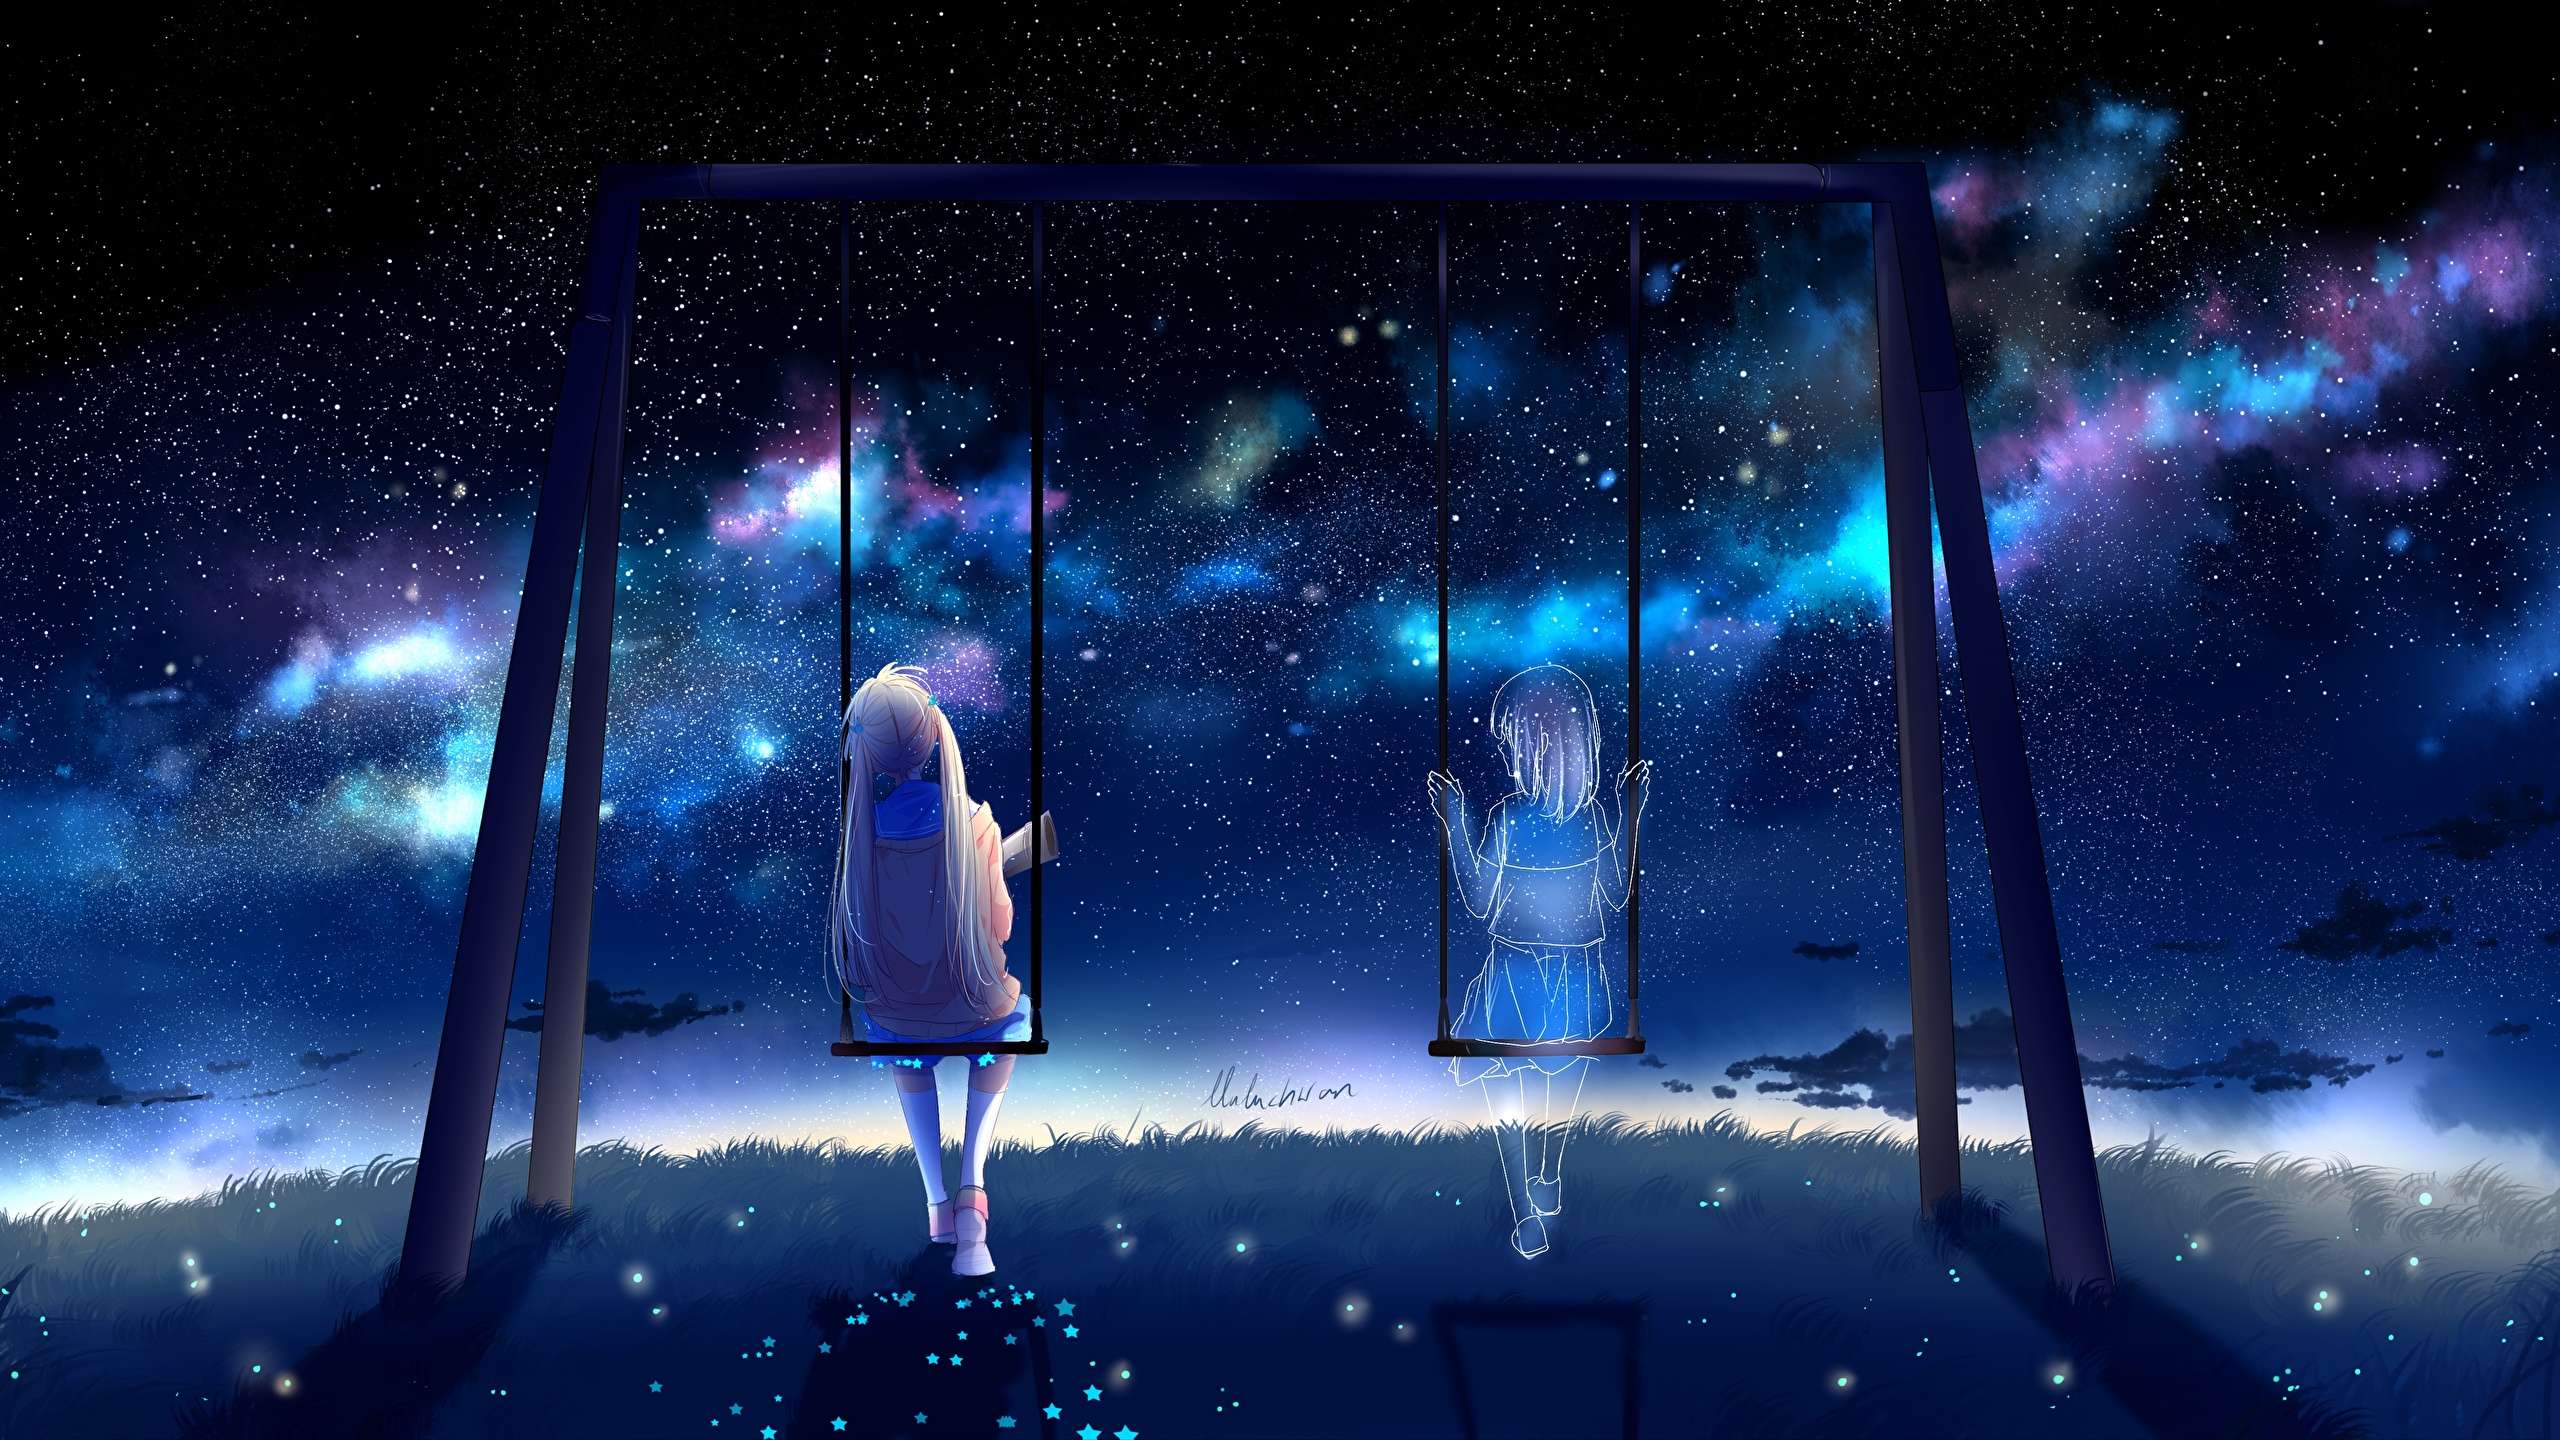 Anime Lonely - 1280x704 Wallpaper 